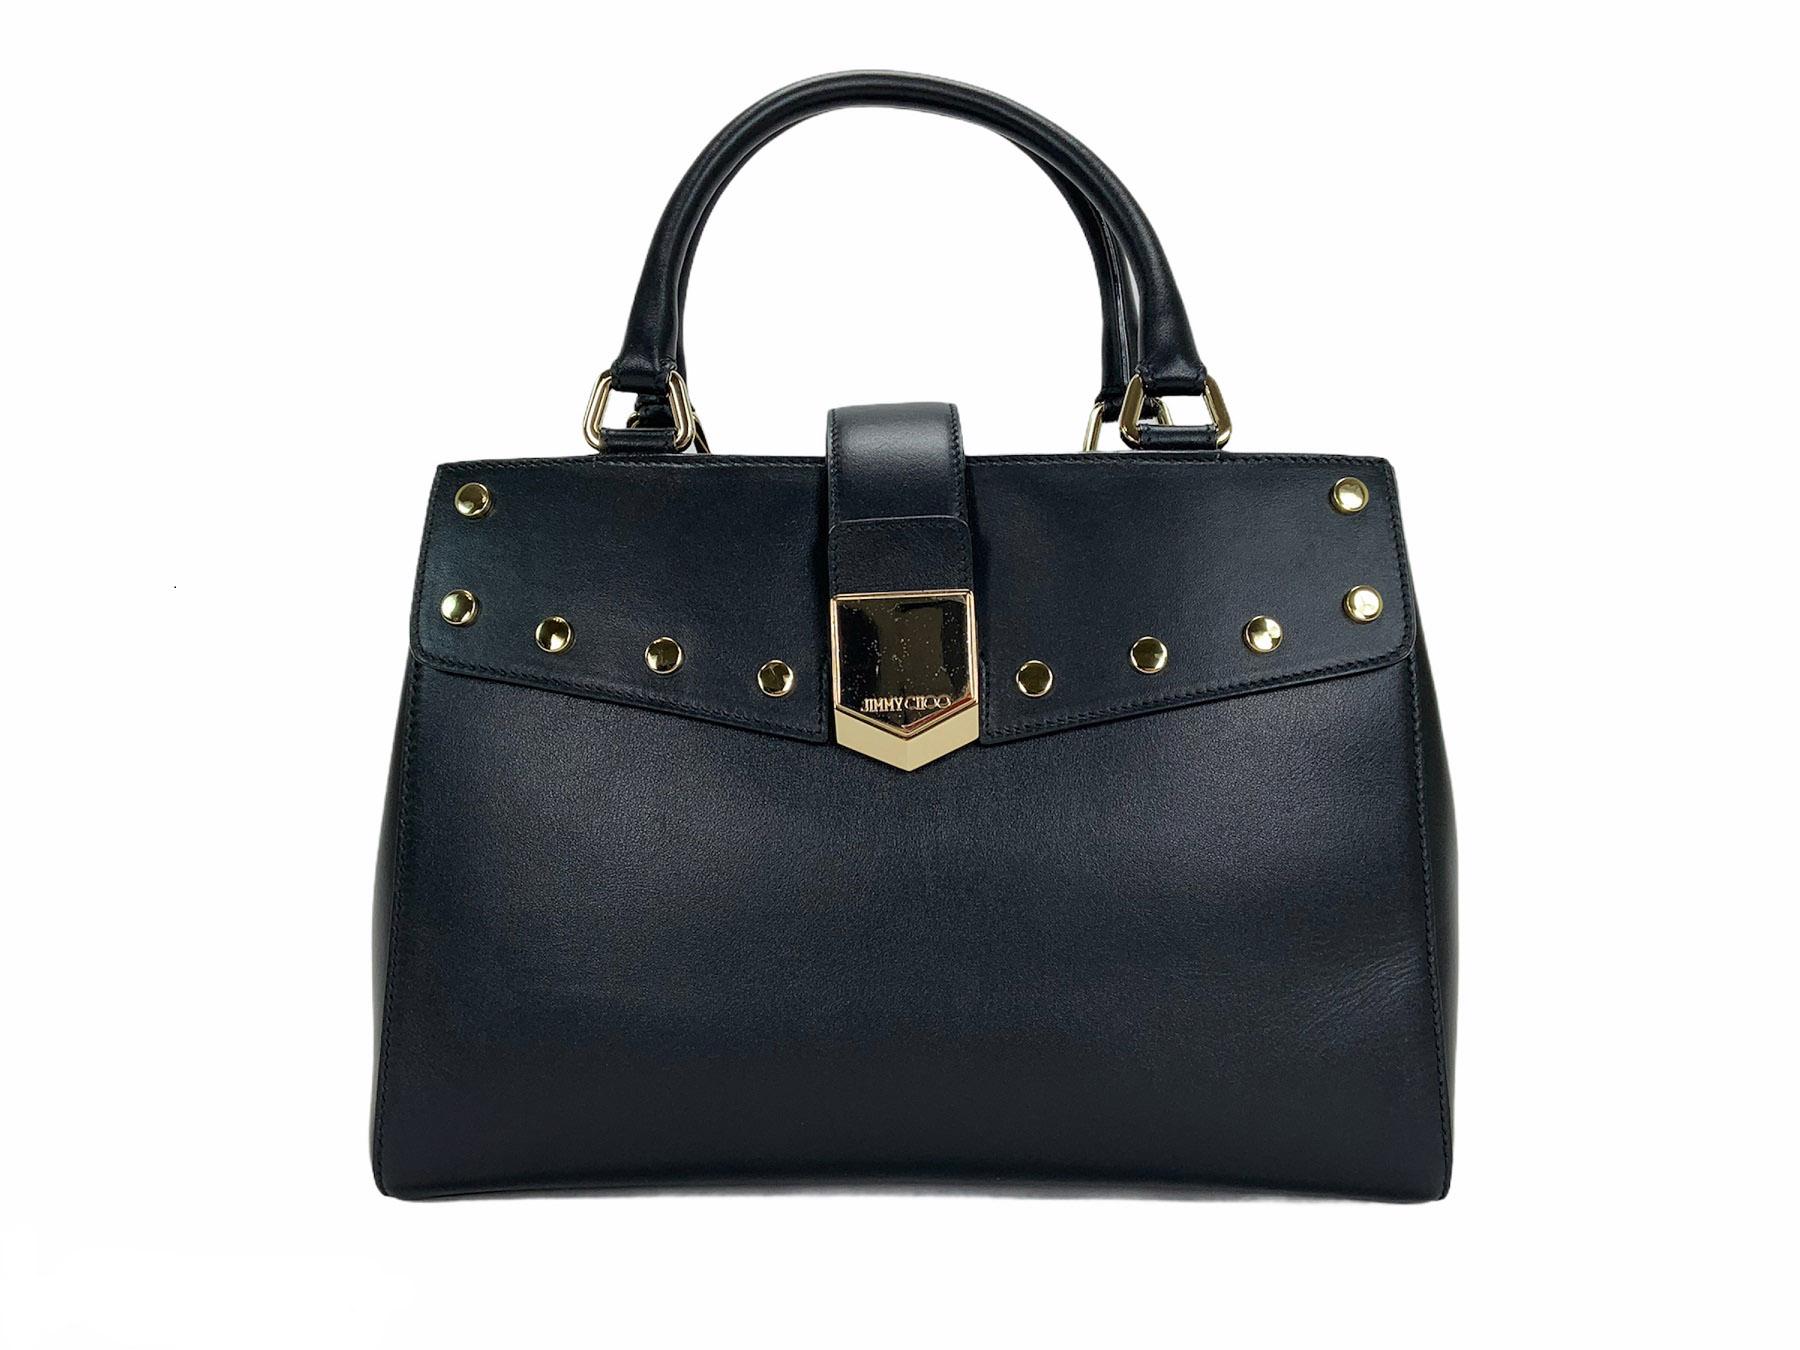 New Jimmy Choo *Lockett* Handbag Tote
Black Leather, Gold-Tone Hardware, Medium Size, Magnetic Snap Closure, Center Zip Pocket, One Interior Side Pocket. 
Dual Rolled Top Handles, Black Interior Lining.
Measurements: W - 12 inches, H - 8.5